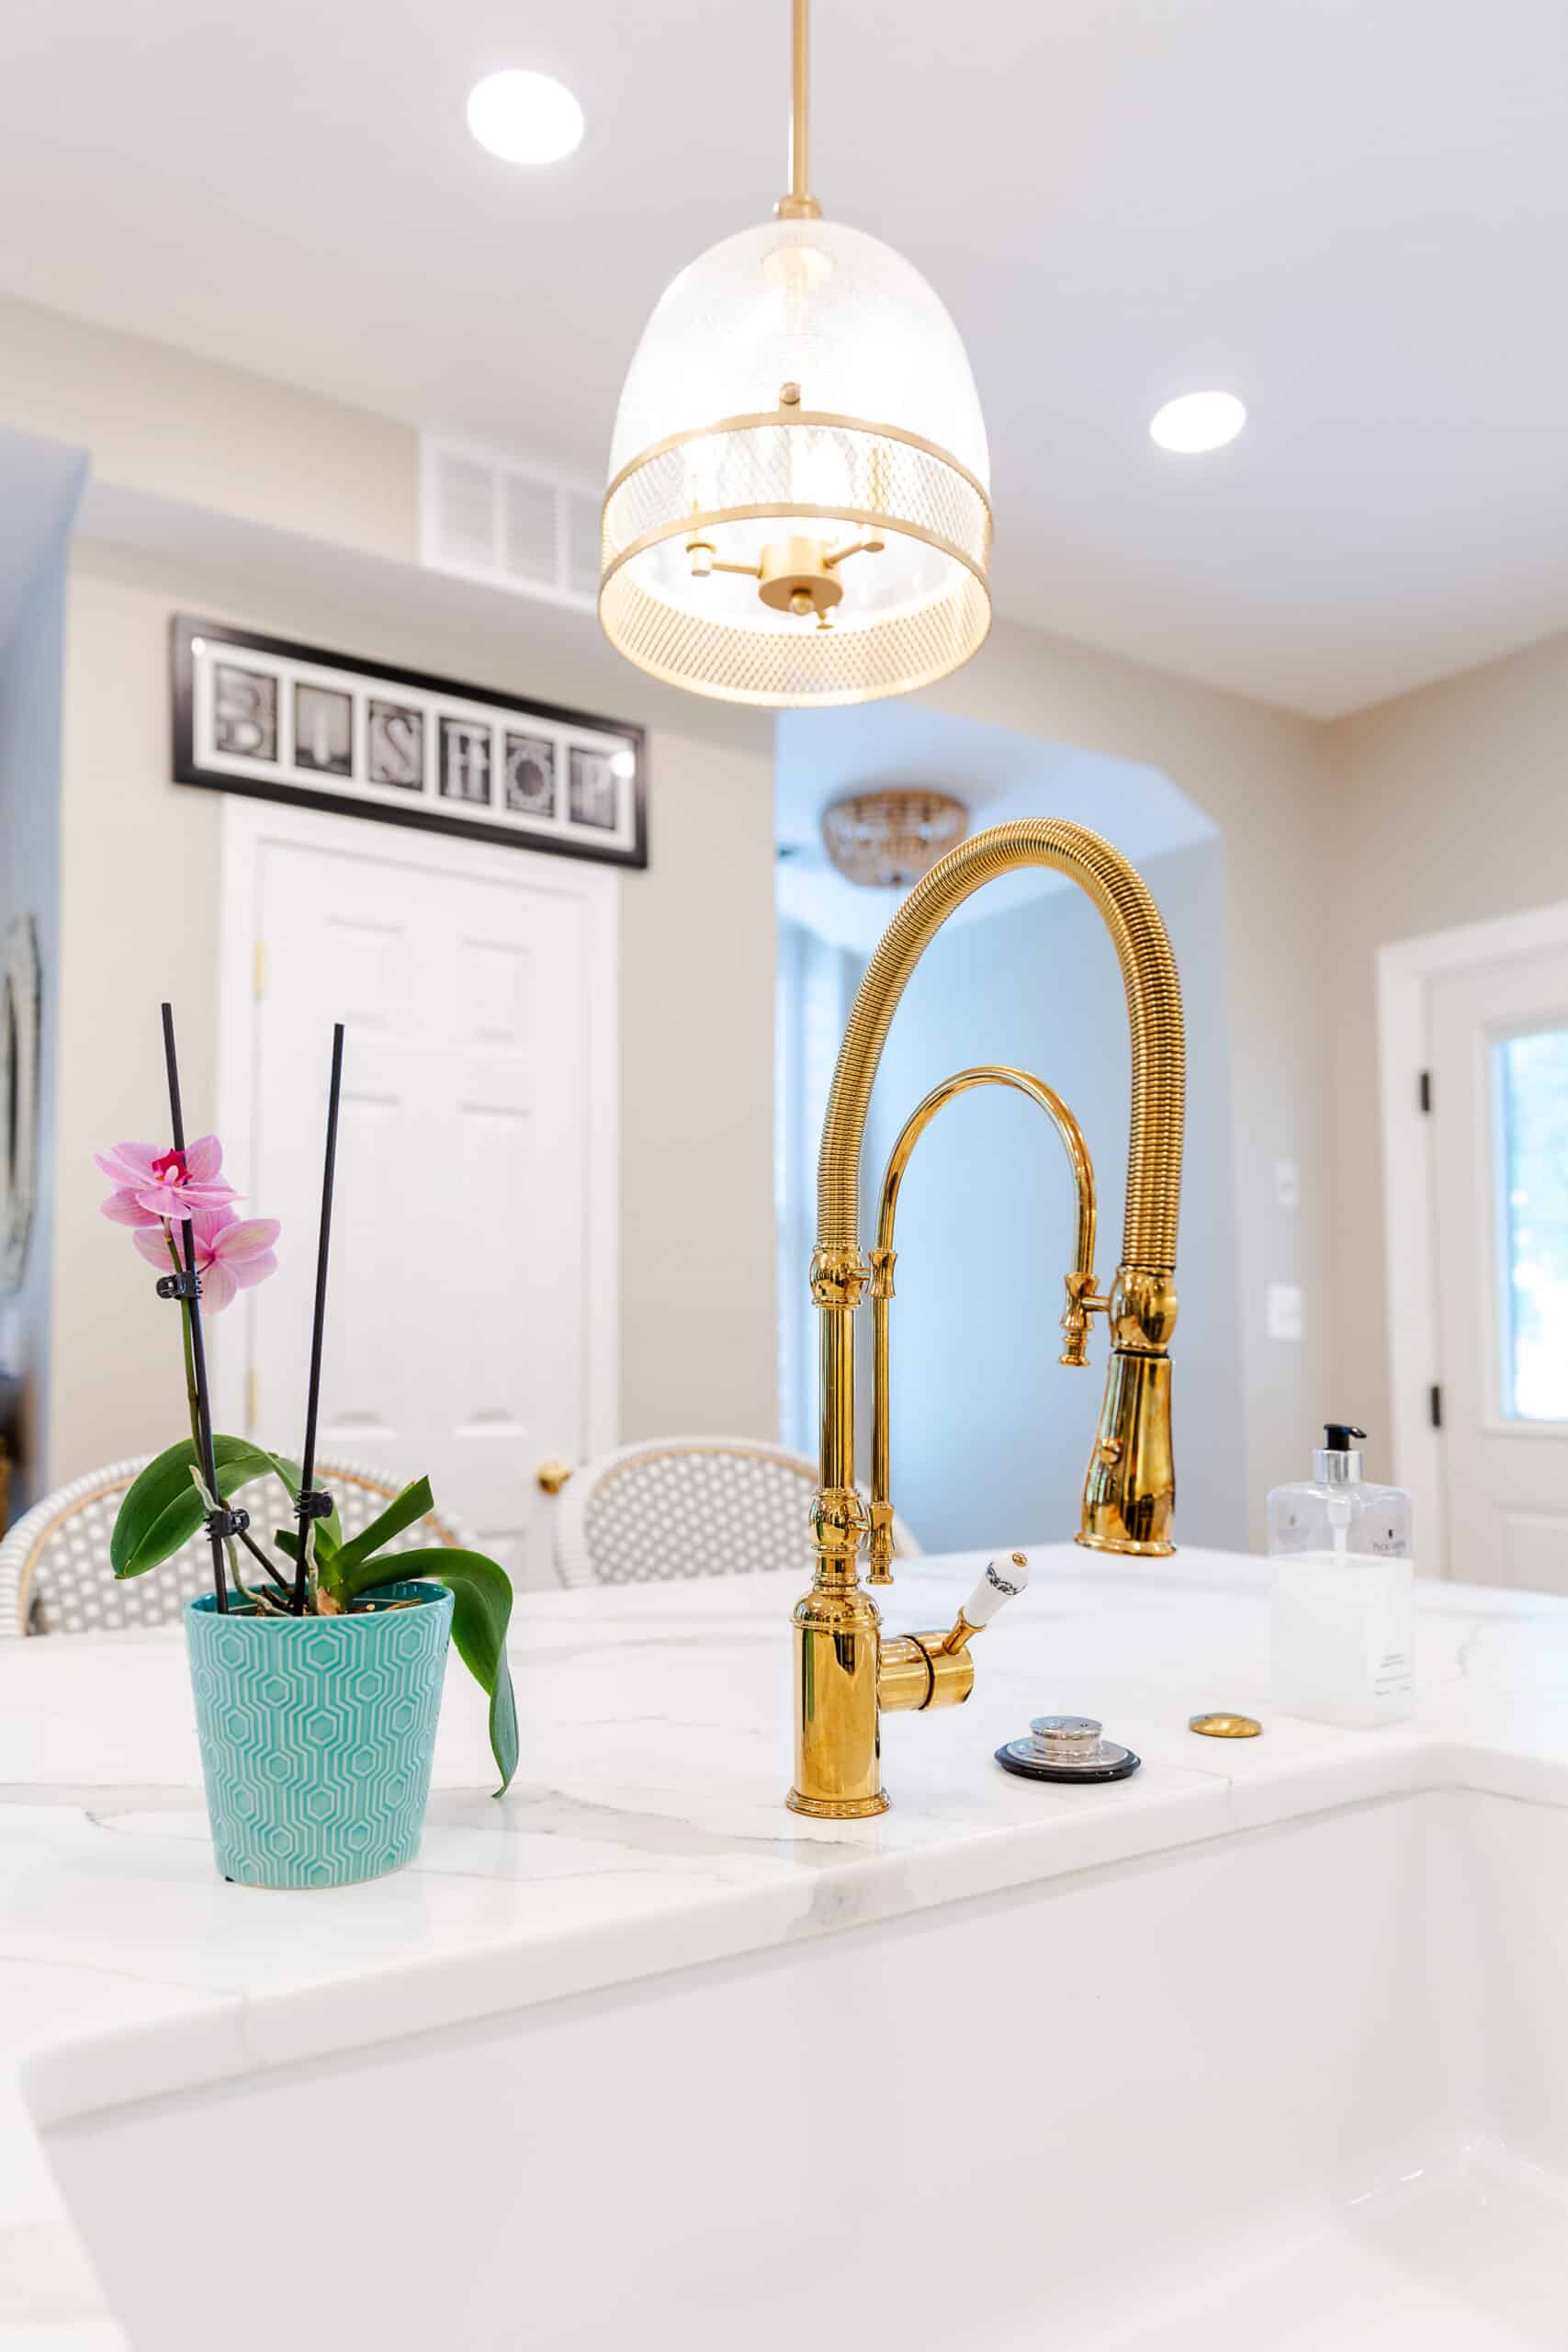 A stylish kitchen sink with a gold faucet and a potted plant